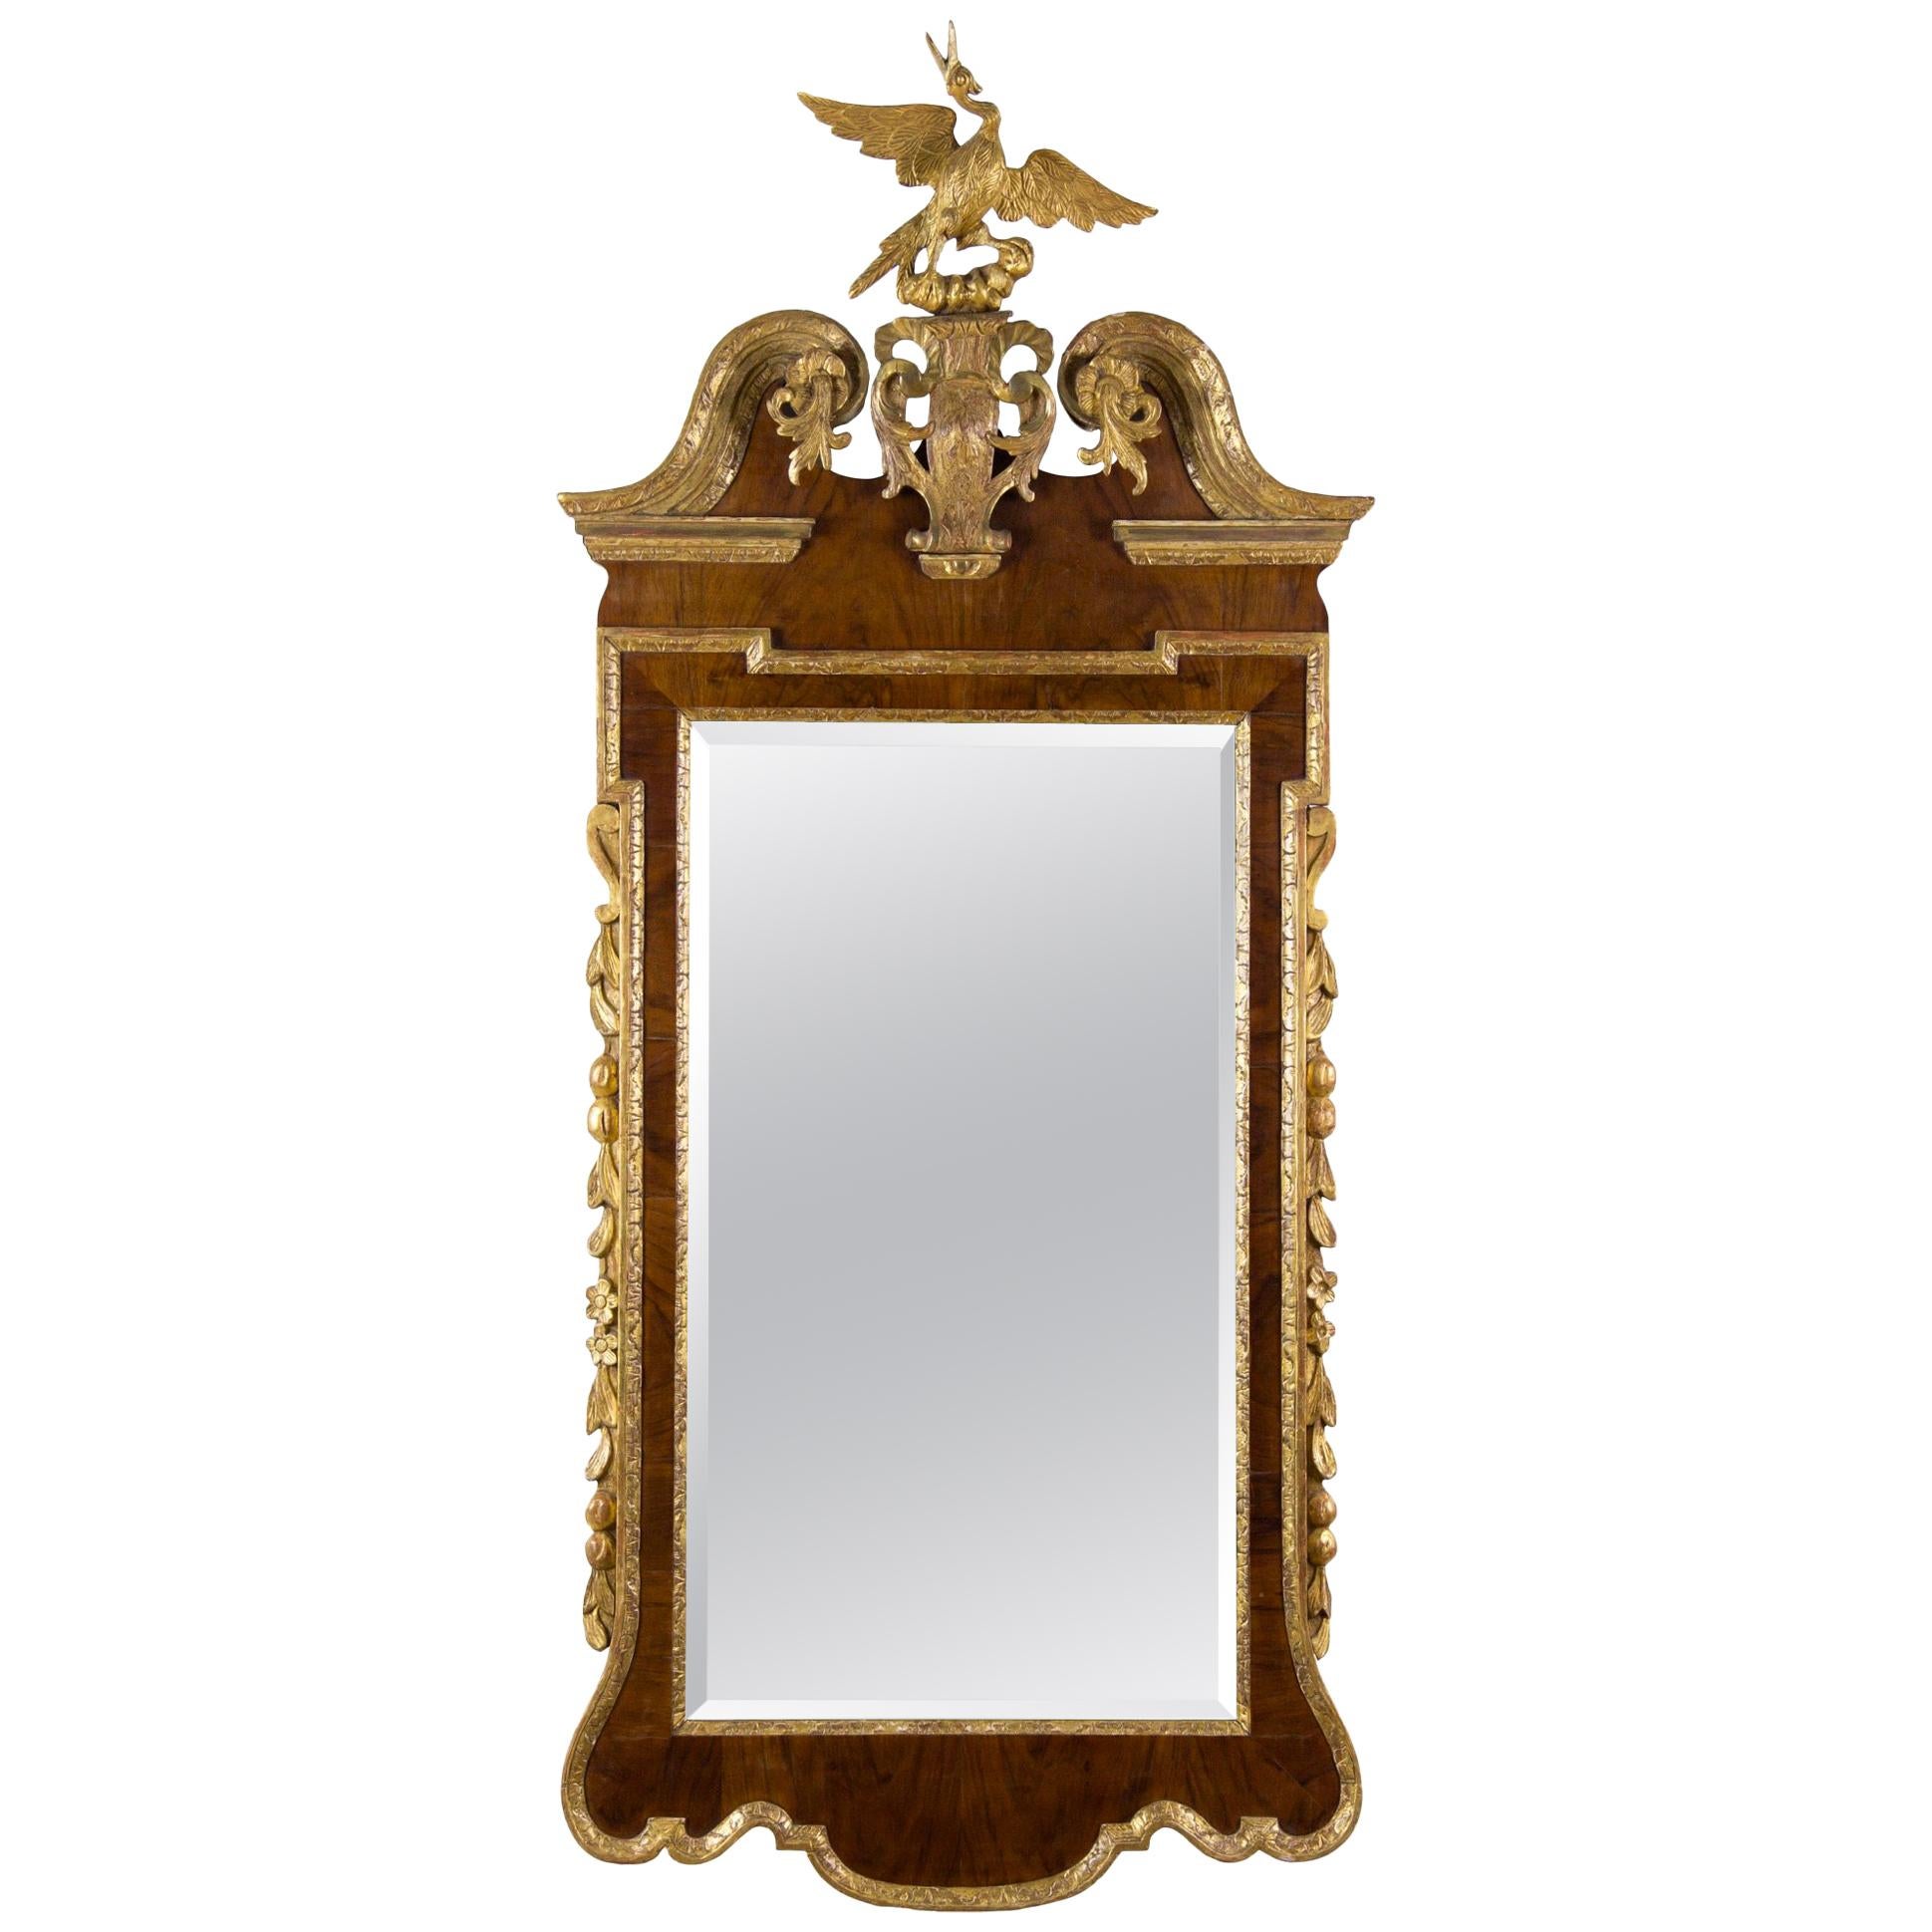 Chippendale Mahogany and Gilded Wood Constitution Mirror with Phoenix, circa 1770 For Sale